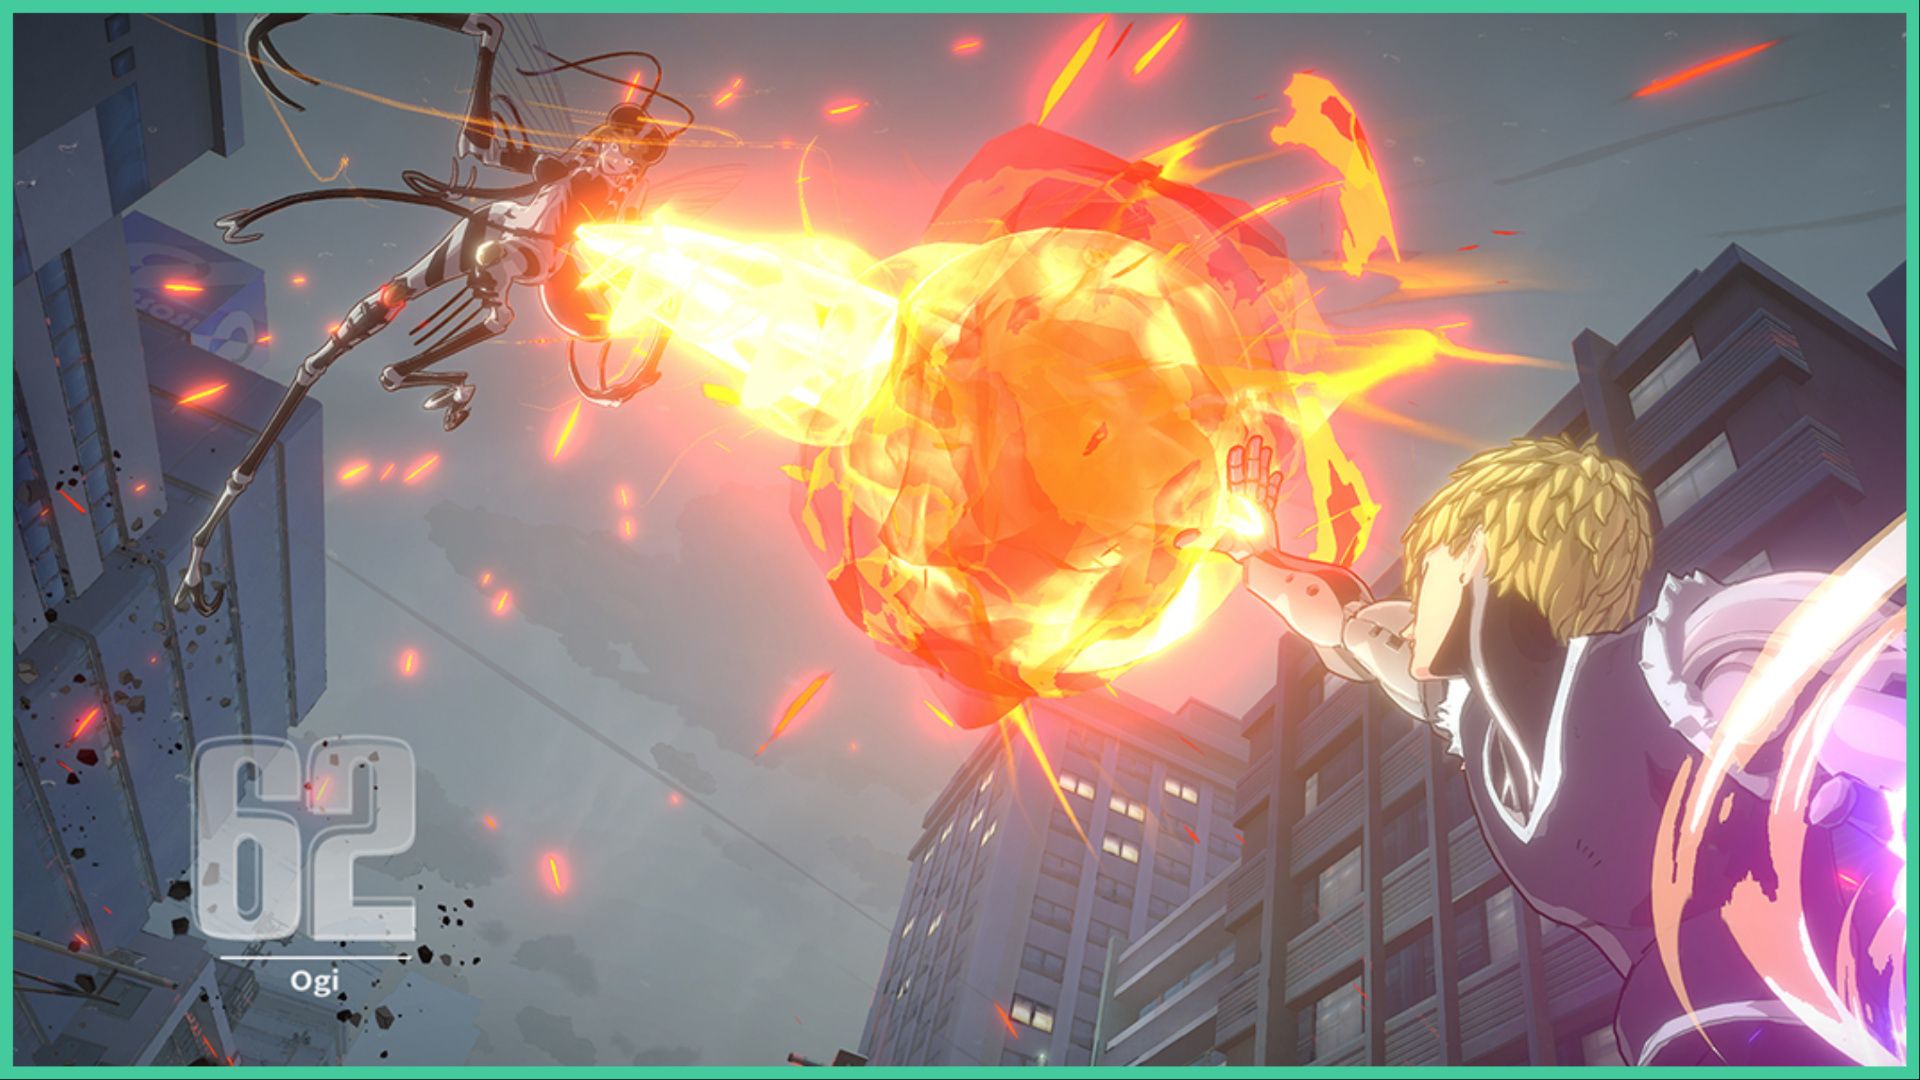 feature image for our one punch man world tier list, the image features a screenshot of genos from the franchise lifting his arm to the sky and producing a blast of flames toward the monster that is mid-air with insect-like legs and arms, they are surrounded by city buildings as the sky is grey and smokey